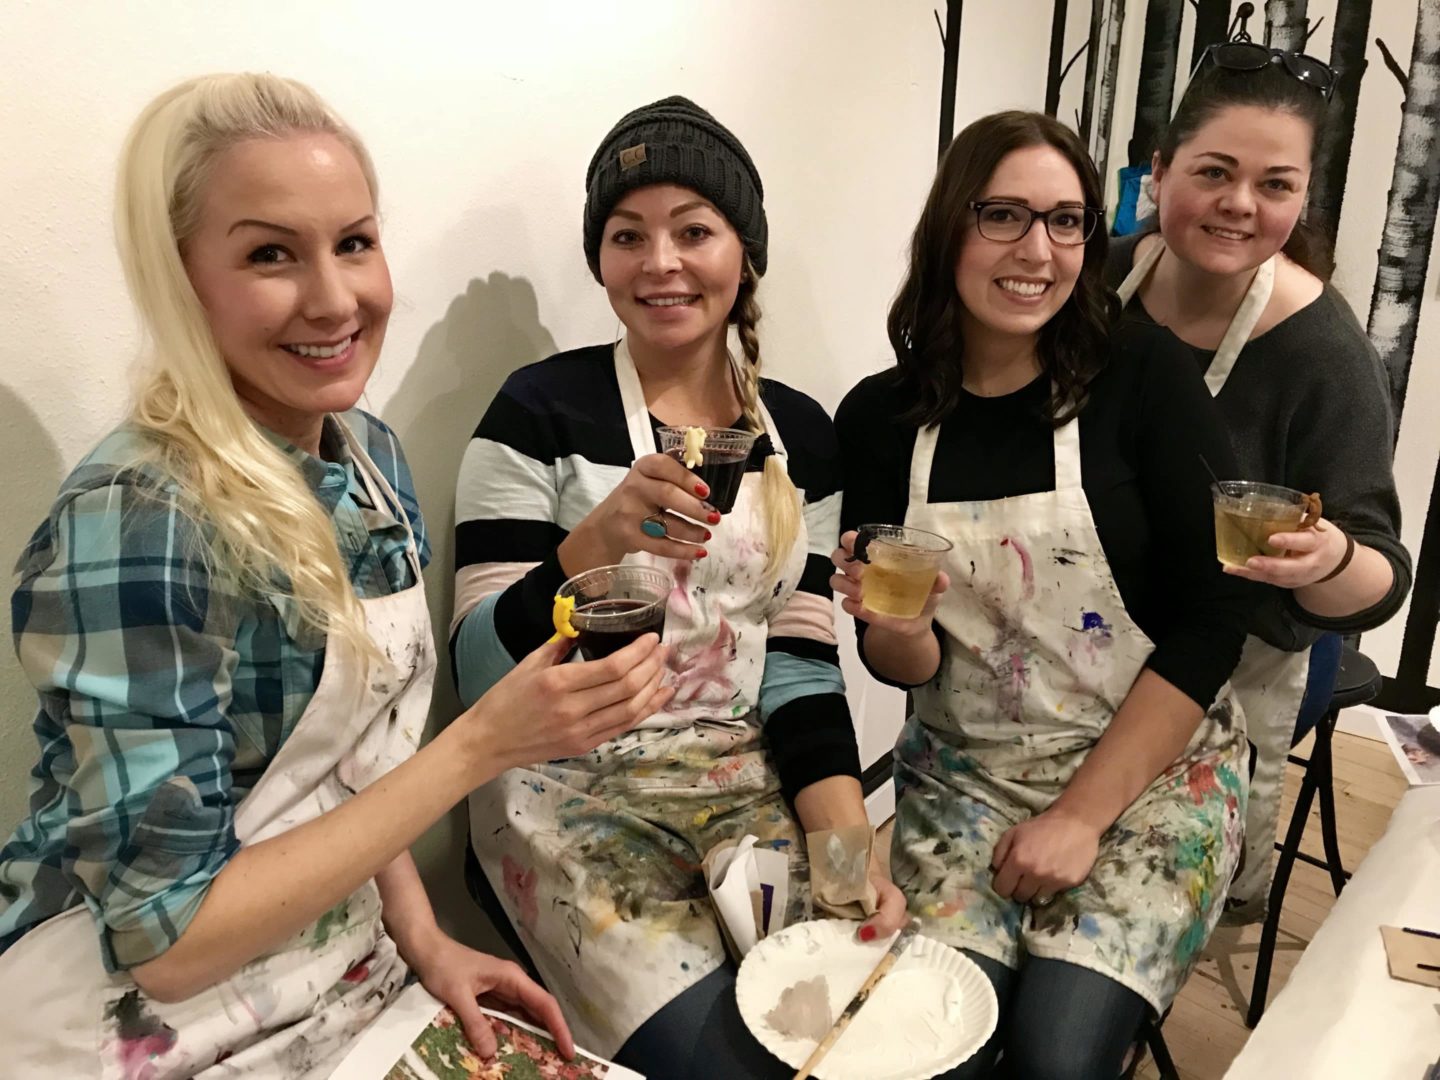 Sip and Paint painting nights near me with friends - private party space!